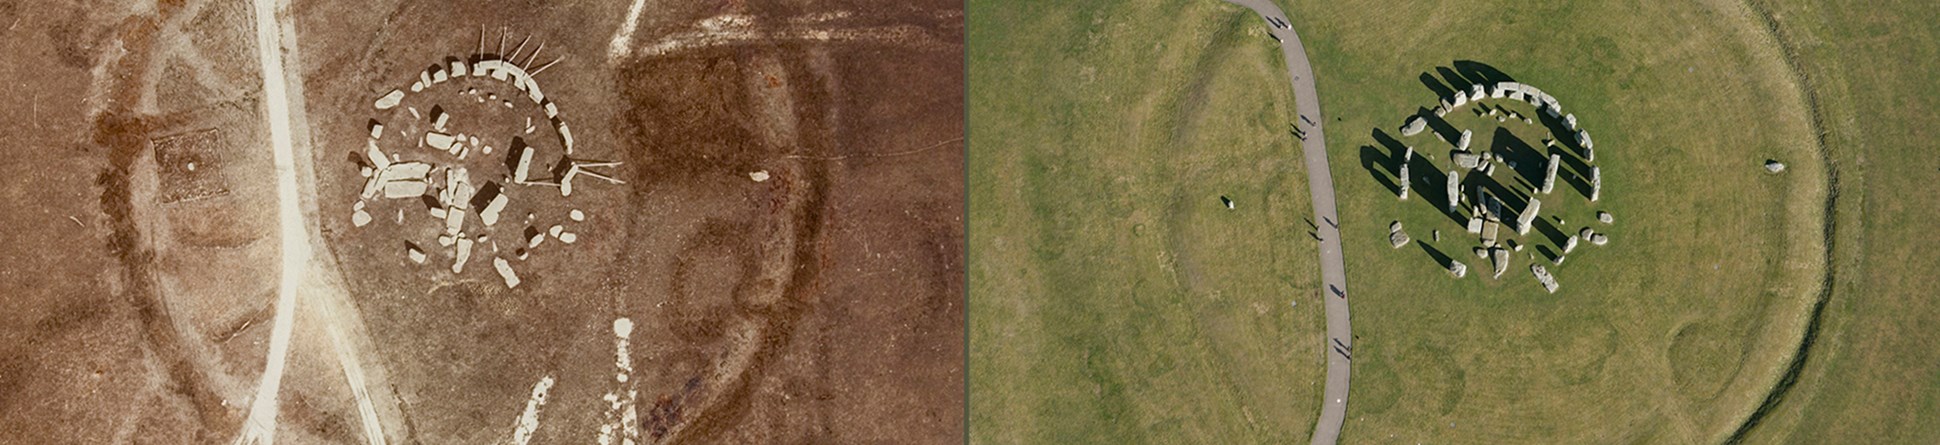 Two aerial images of Stonehenge taken in 1906 and 2006.